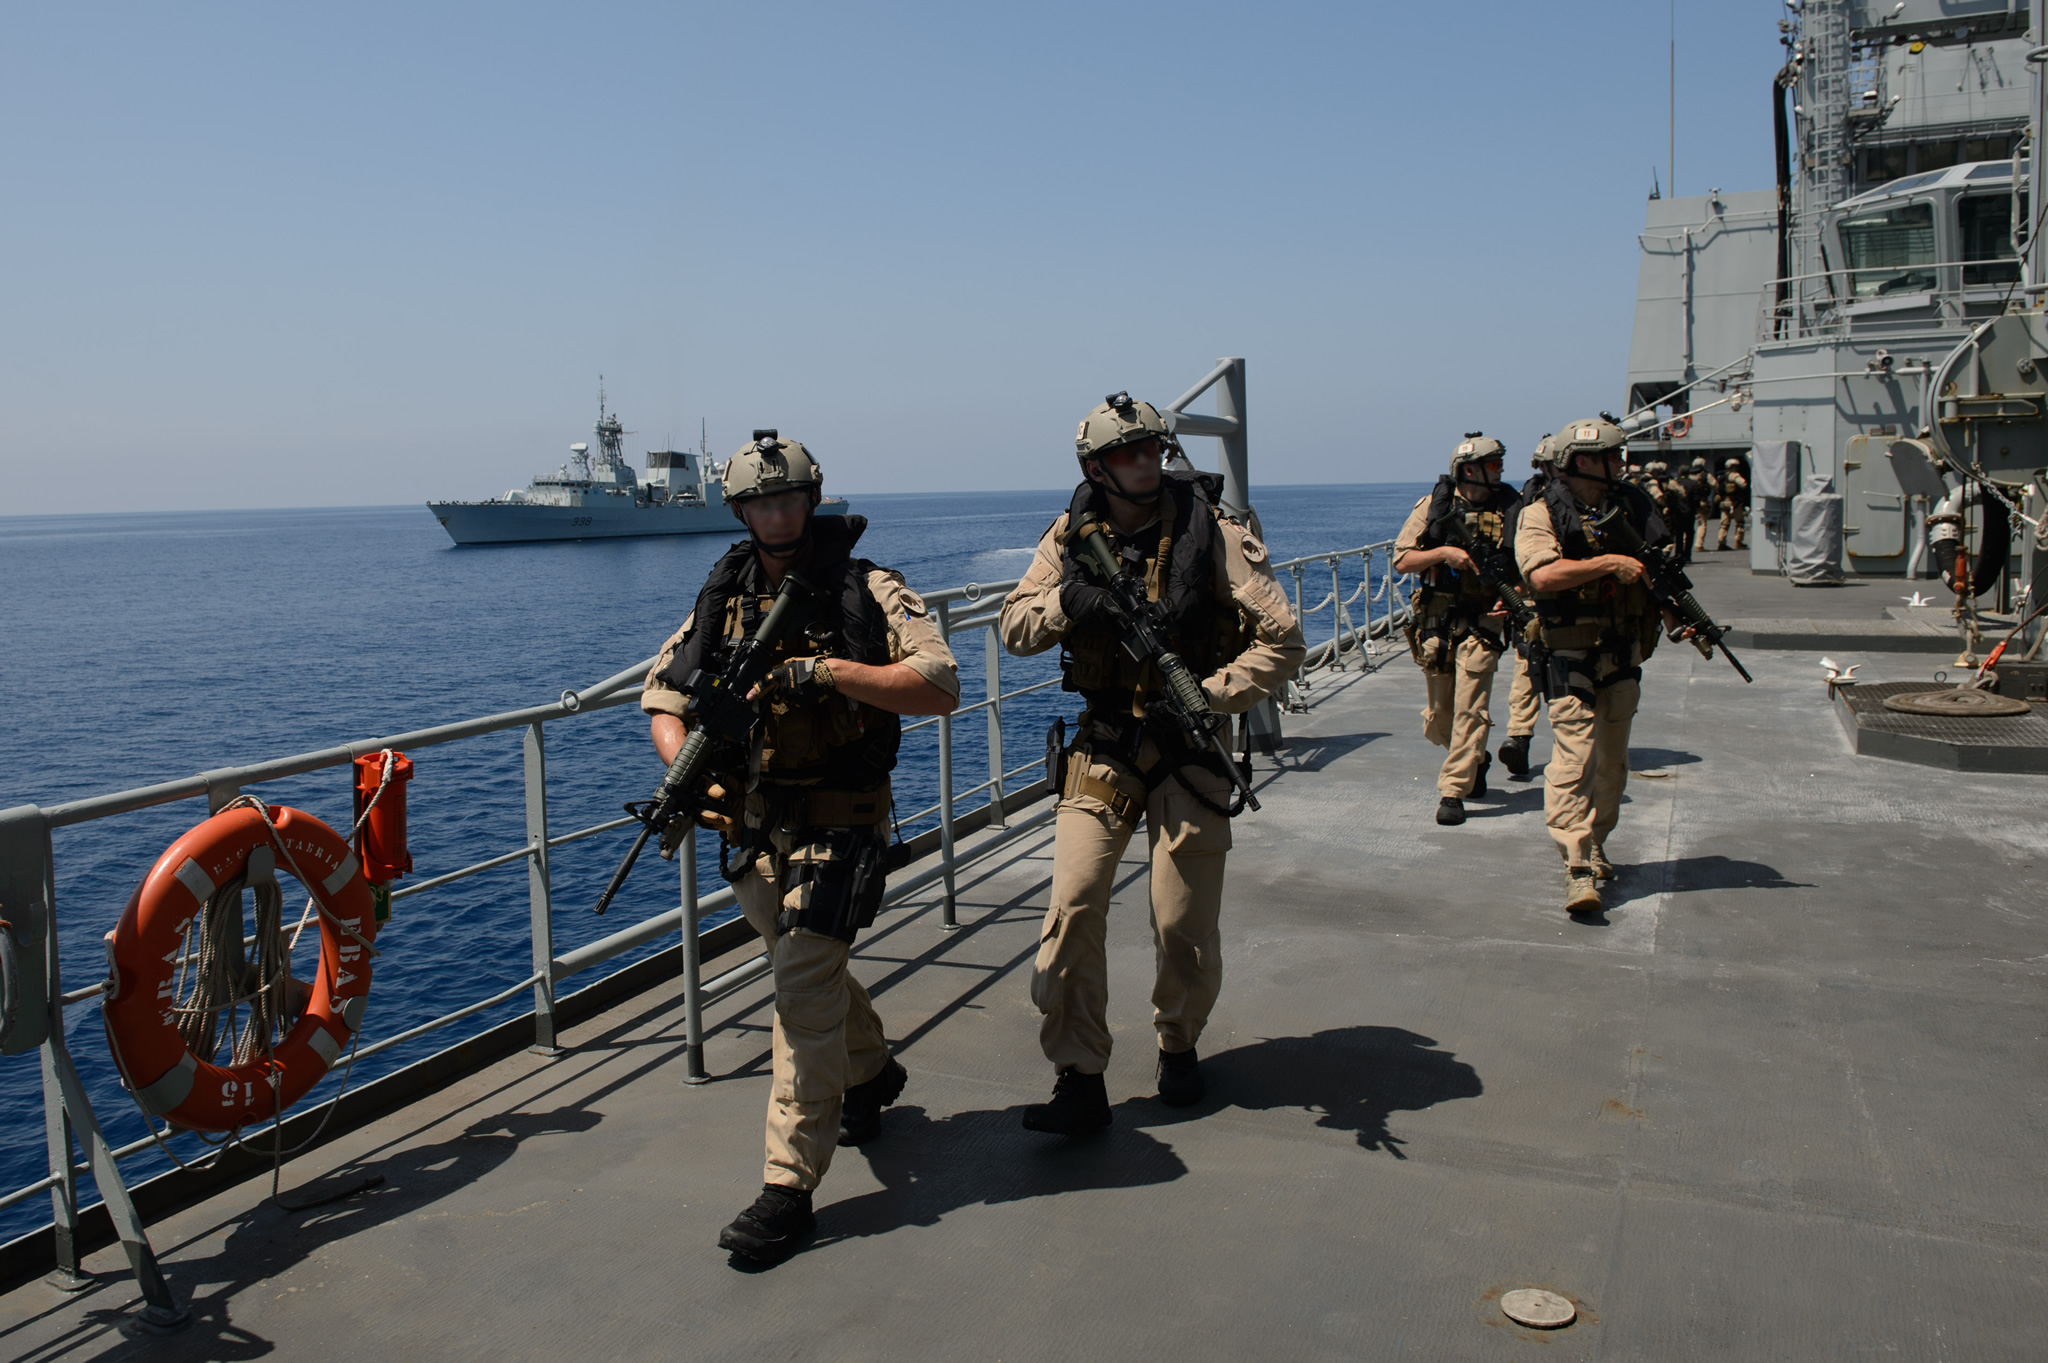 22 July 2015. The Enhanced Naval Boarding Party from Her Majesty’s Canadian Ship WINNIPEG clears the upper deck on the Spanish Ship CANTABRIA while conducting training with Standing NATO Maritime Group Two during Operation REASSURANCE (Photo: Cpl Stuart MacNeil).